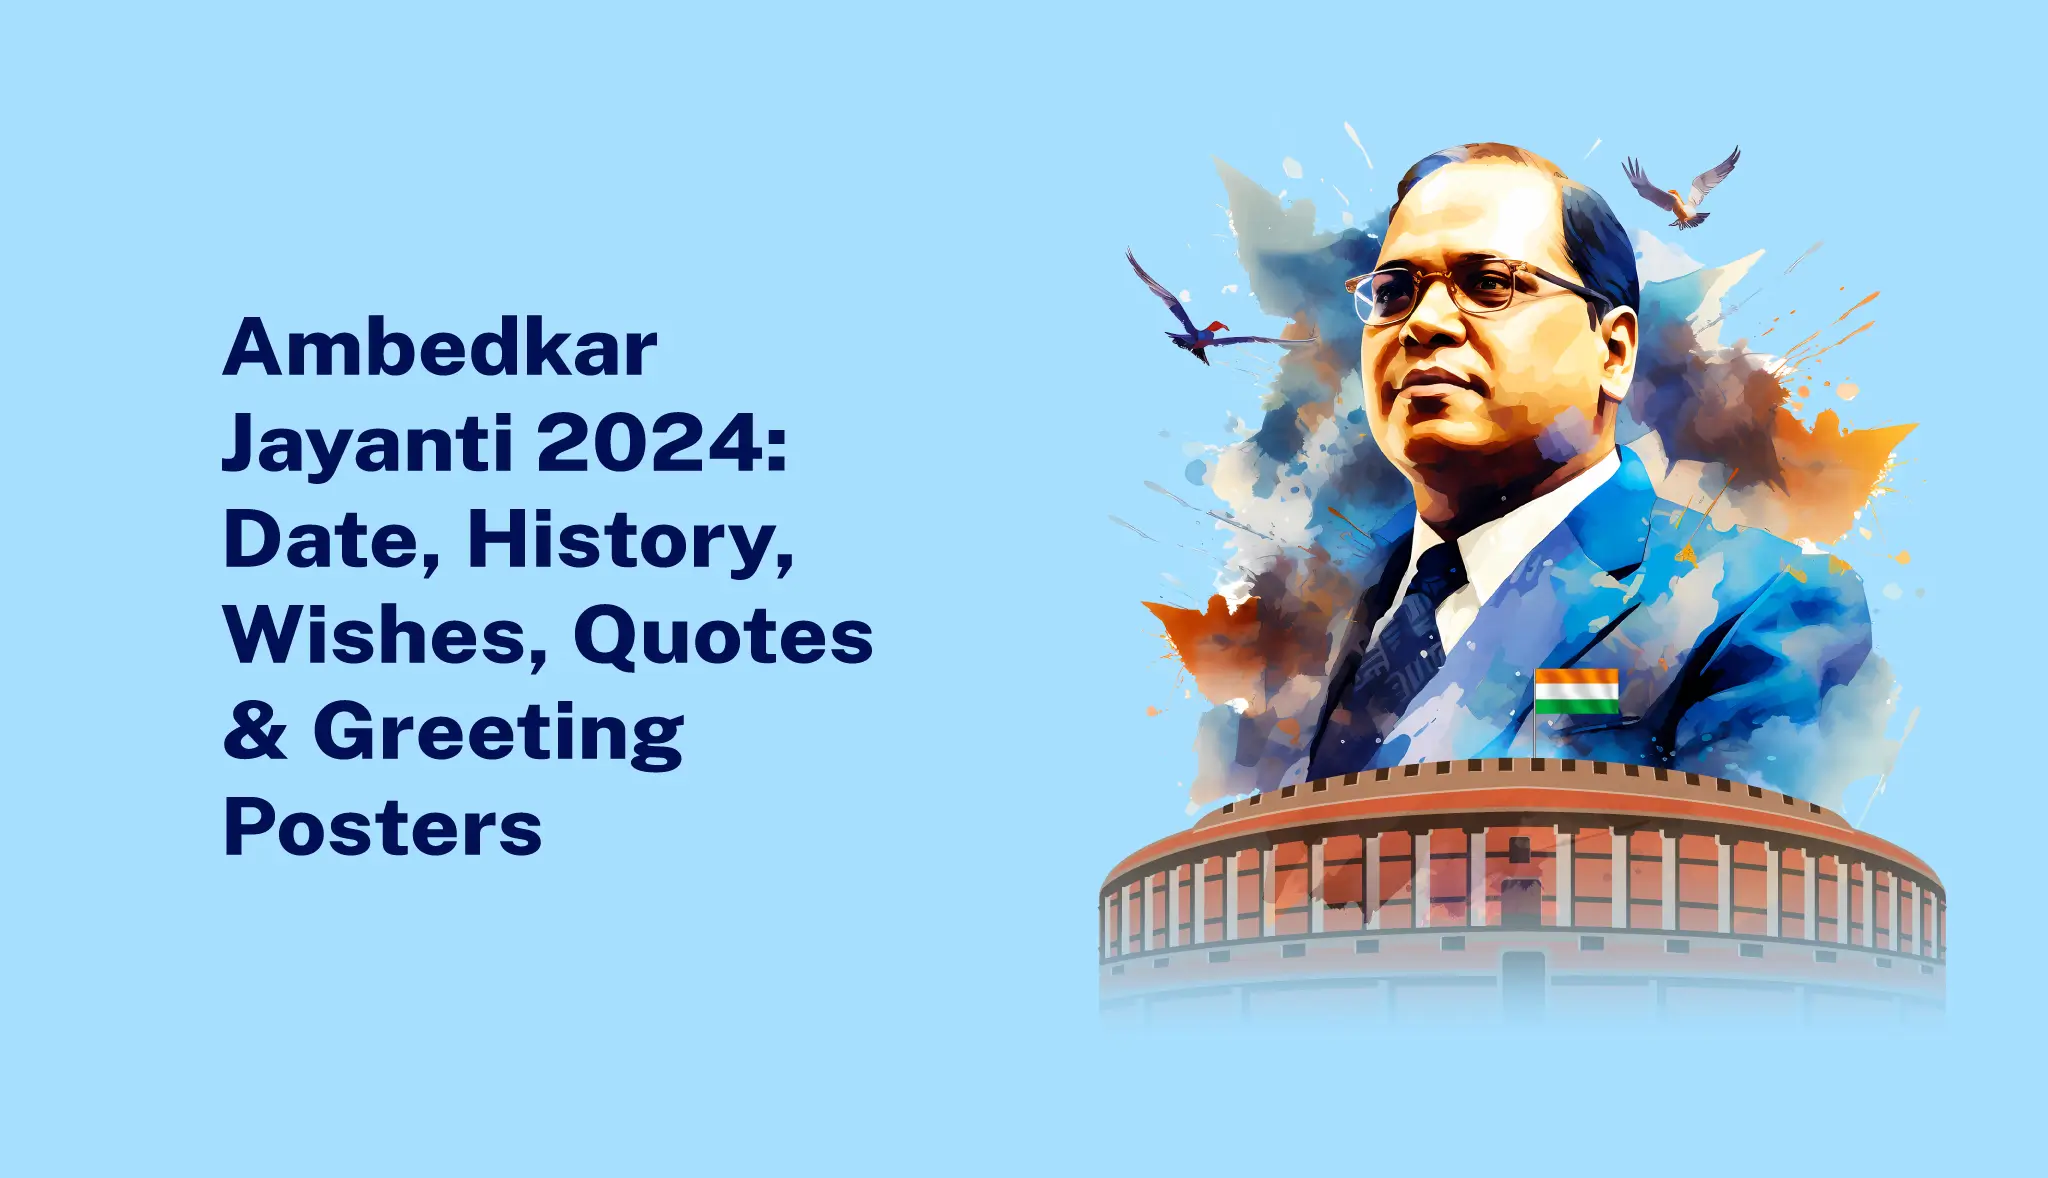 Ambedkar Jayanti 2024: Date, History, Wishes, Quotes & Posters - Postive